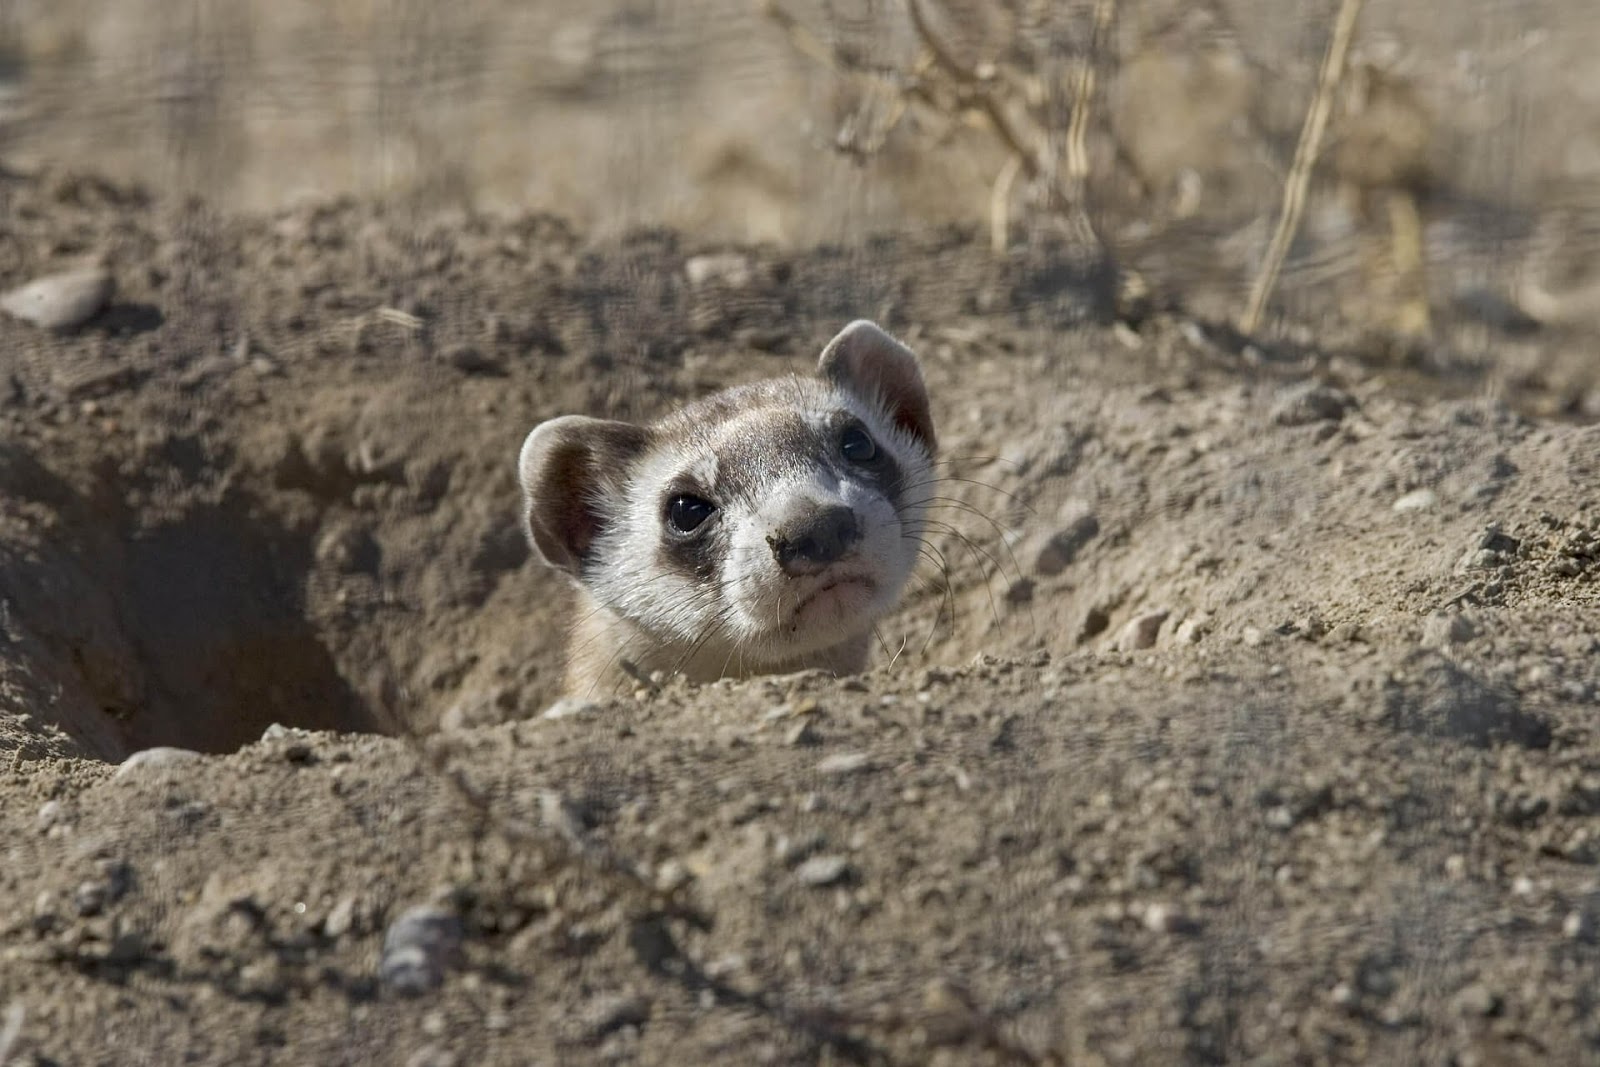 A black-footed ferret poking its head out of ahole